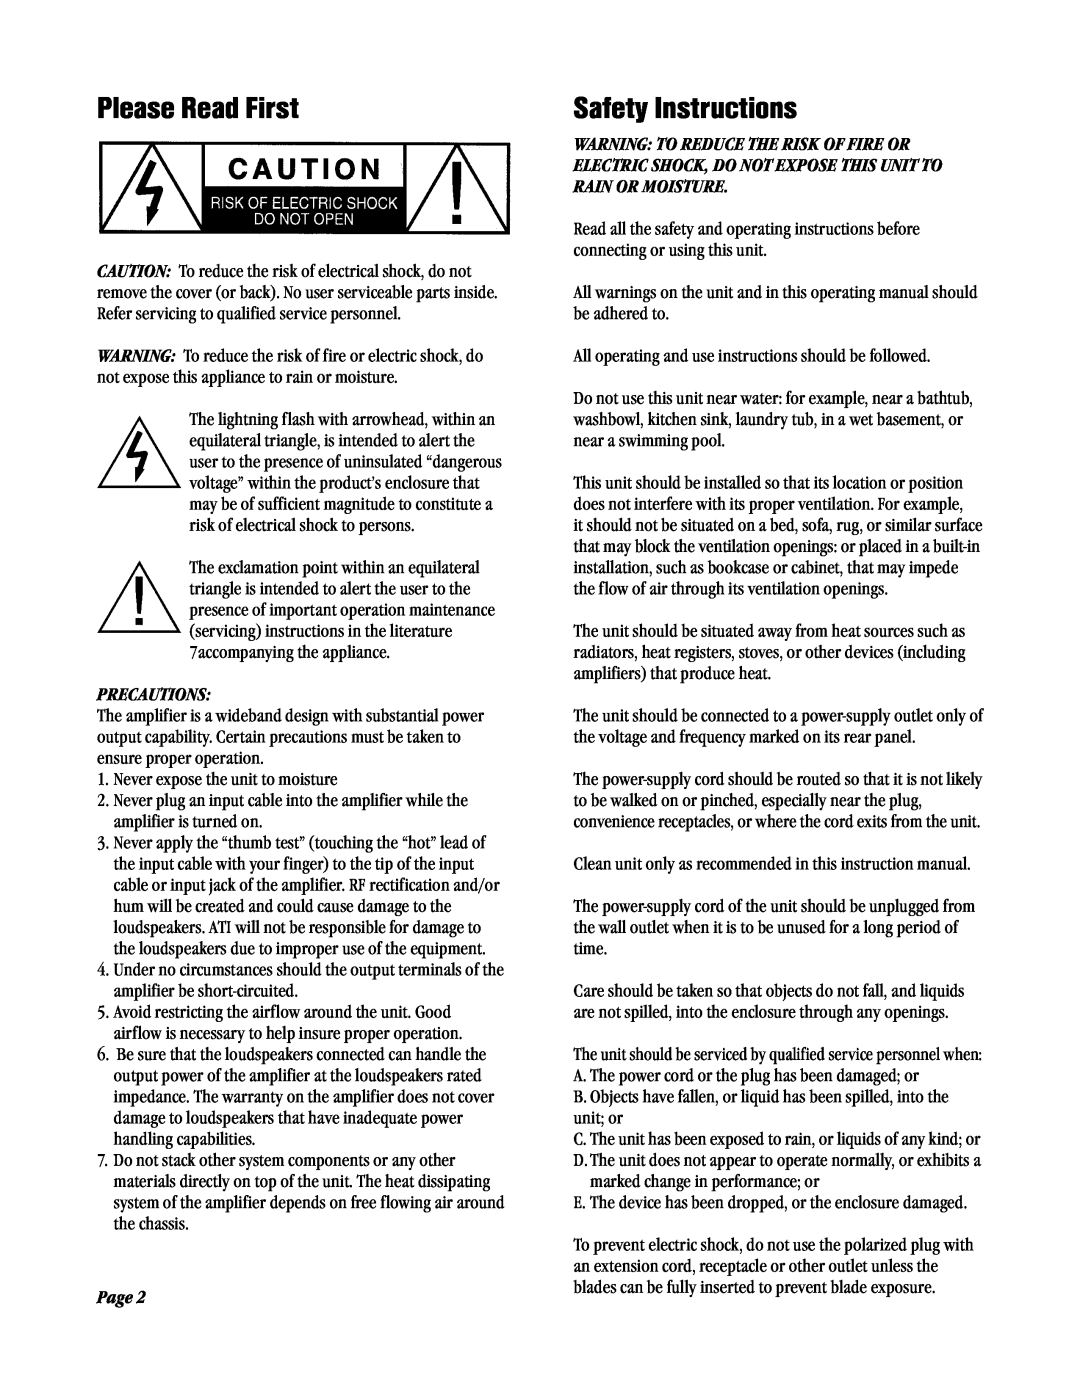 Amplifier Tech AT1800 Series manual Please Read First, Safety Instructions, Precautions, Page 